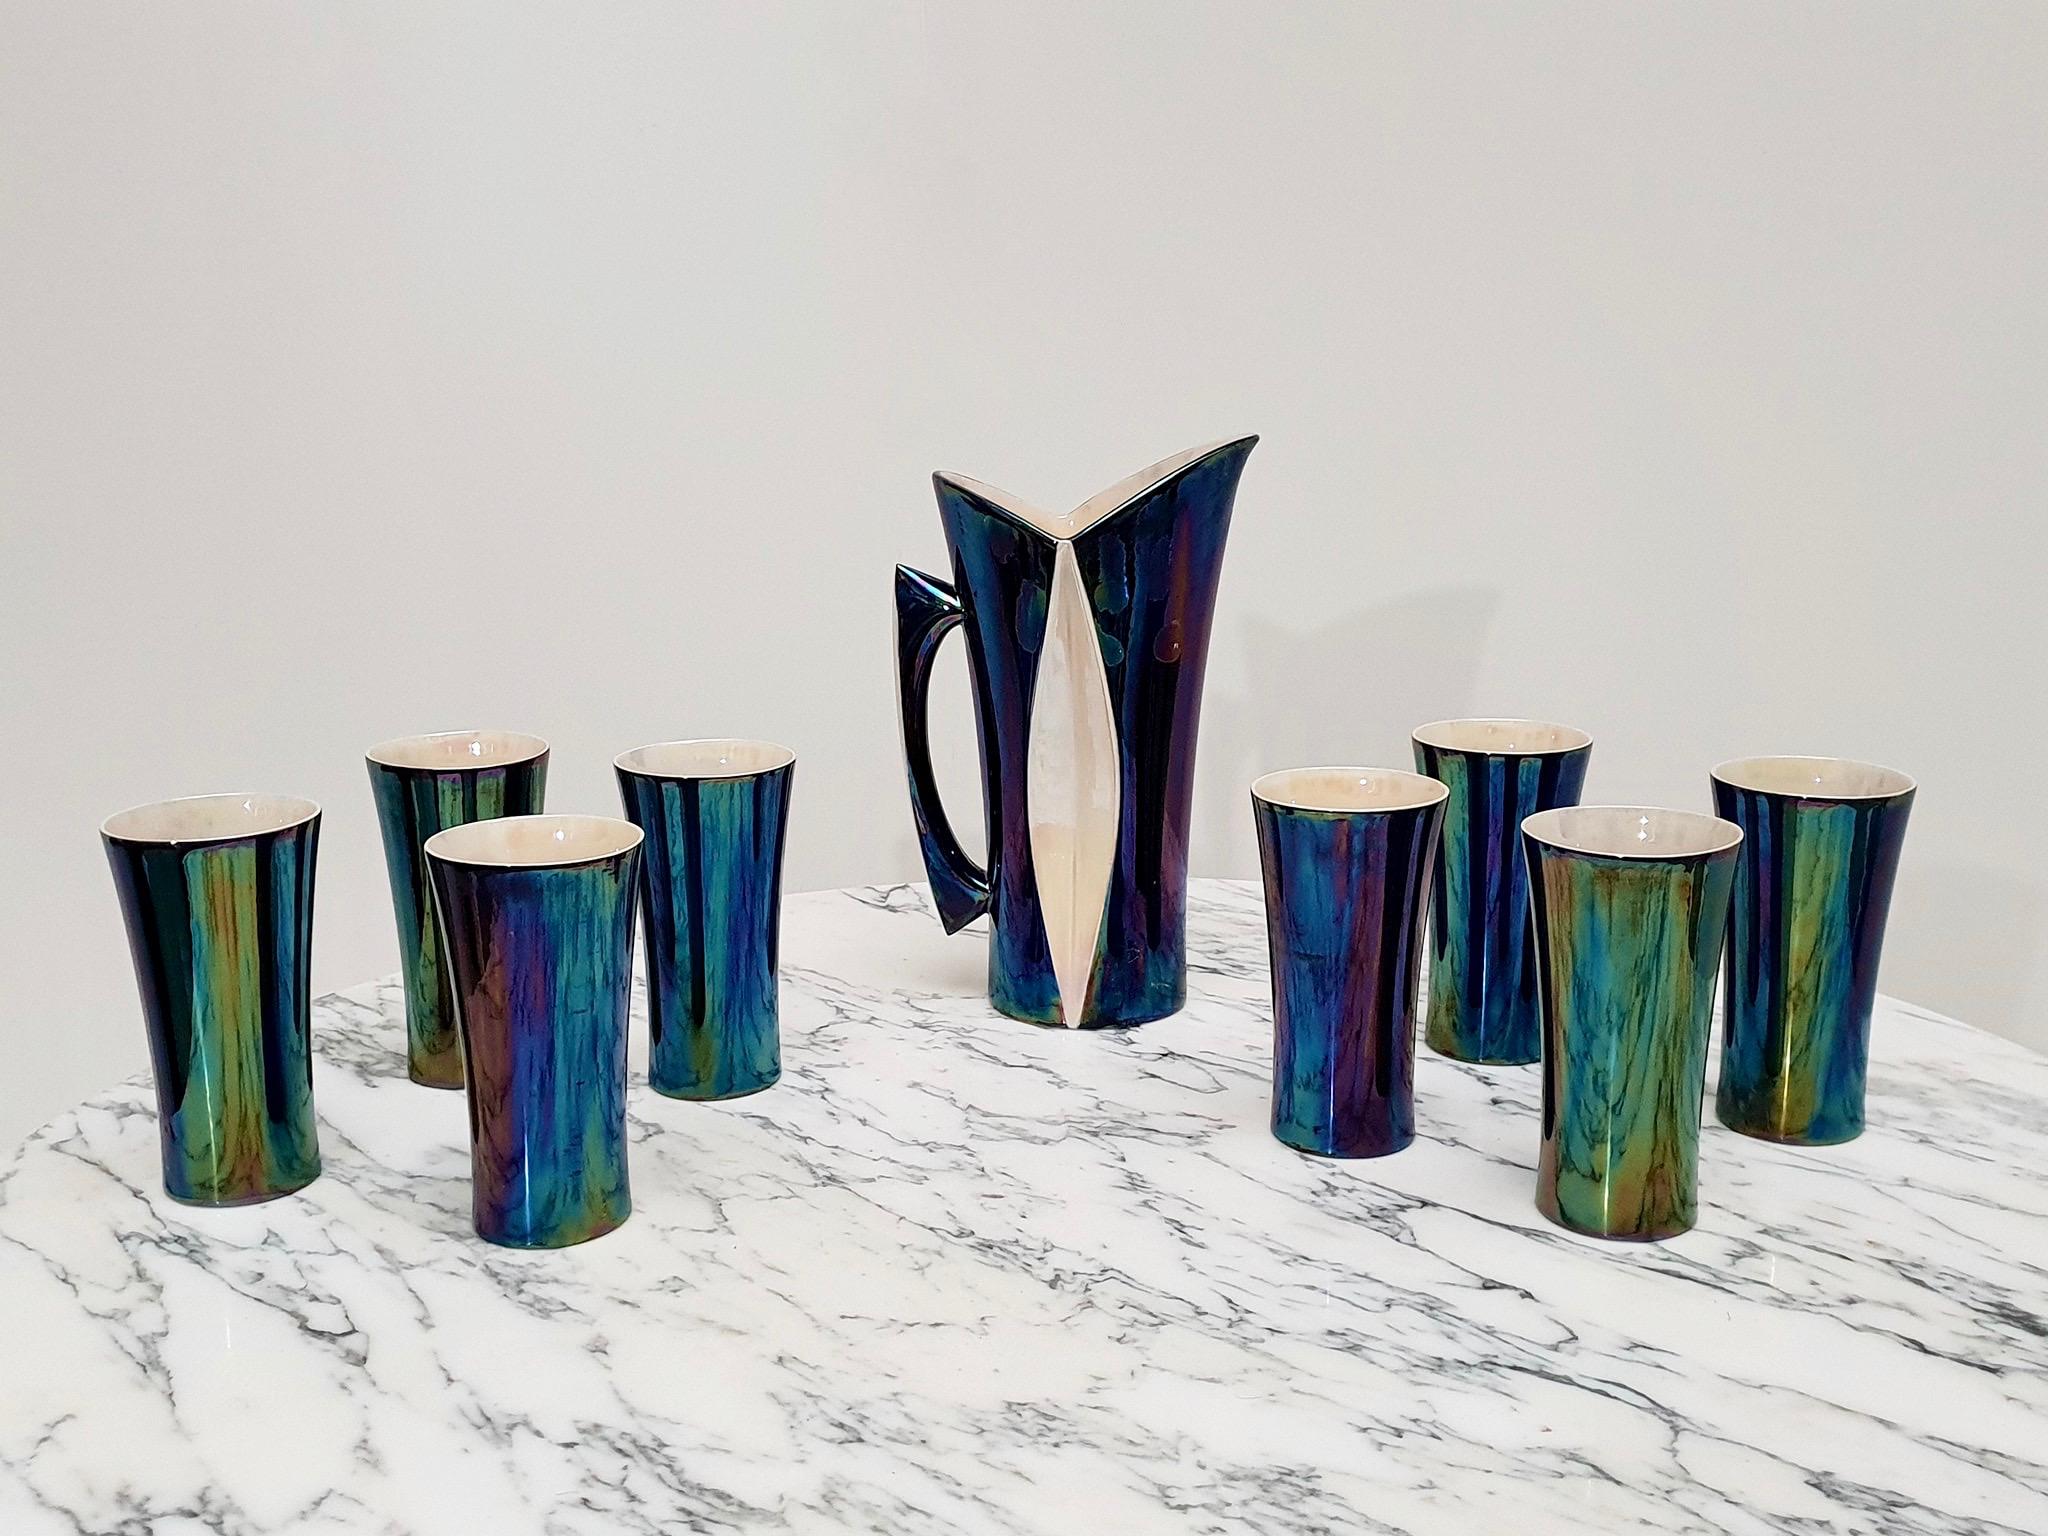 Beautiful and rare 1950s-1970s Hollywood regency iridescent drink set composed of a jug and eight glasses in enameled ceramic, made in France (possible by Vallauris), a potter's French village on the Riviera where Picasso has worked. All pieces are